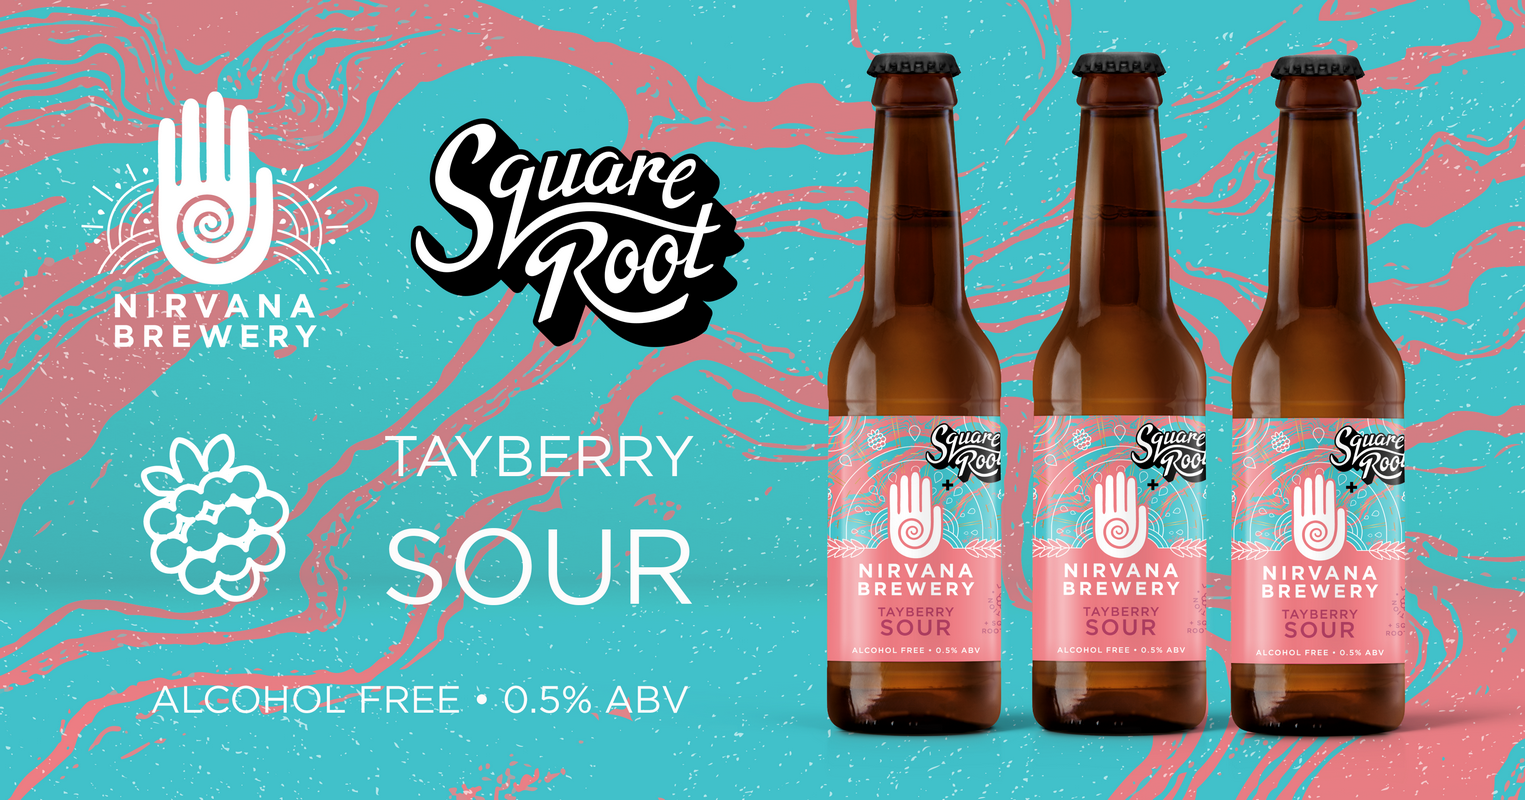 Nirvana Square Root Tayberry Sour